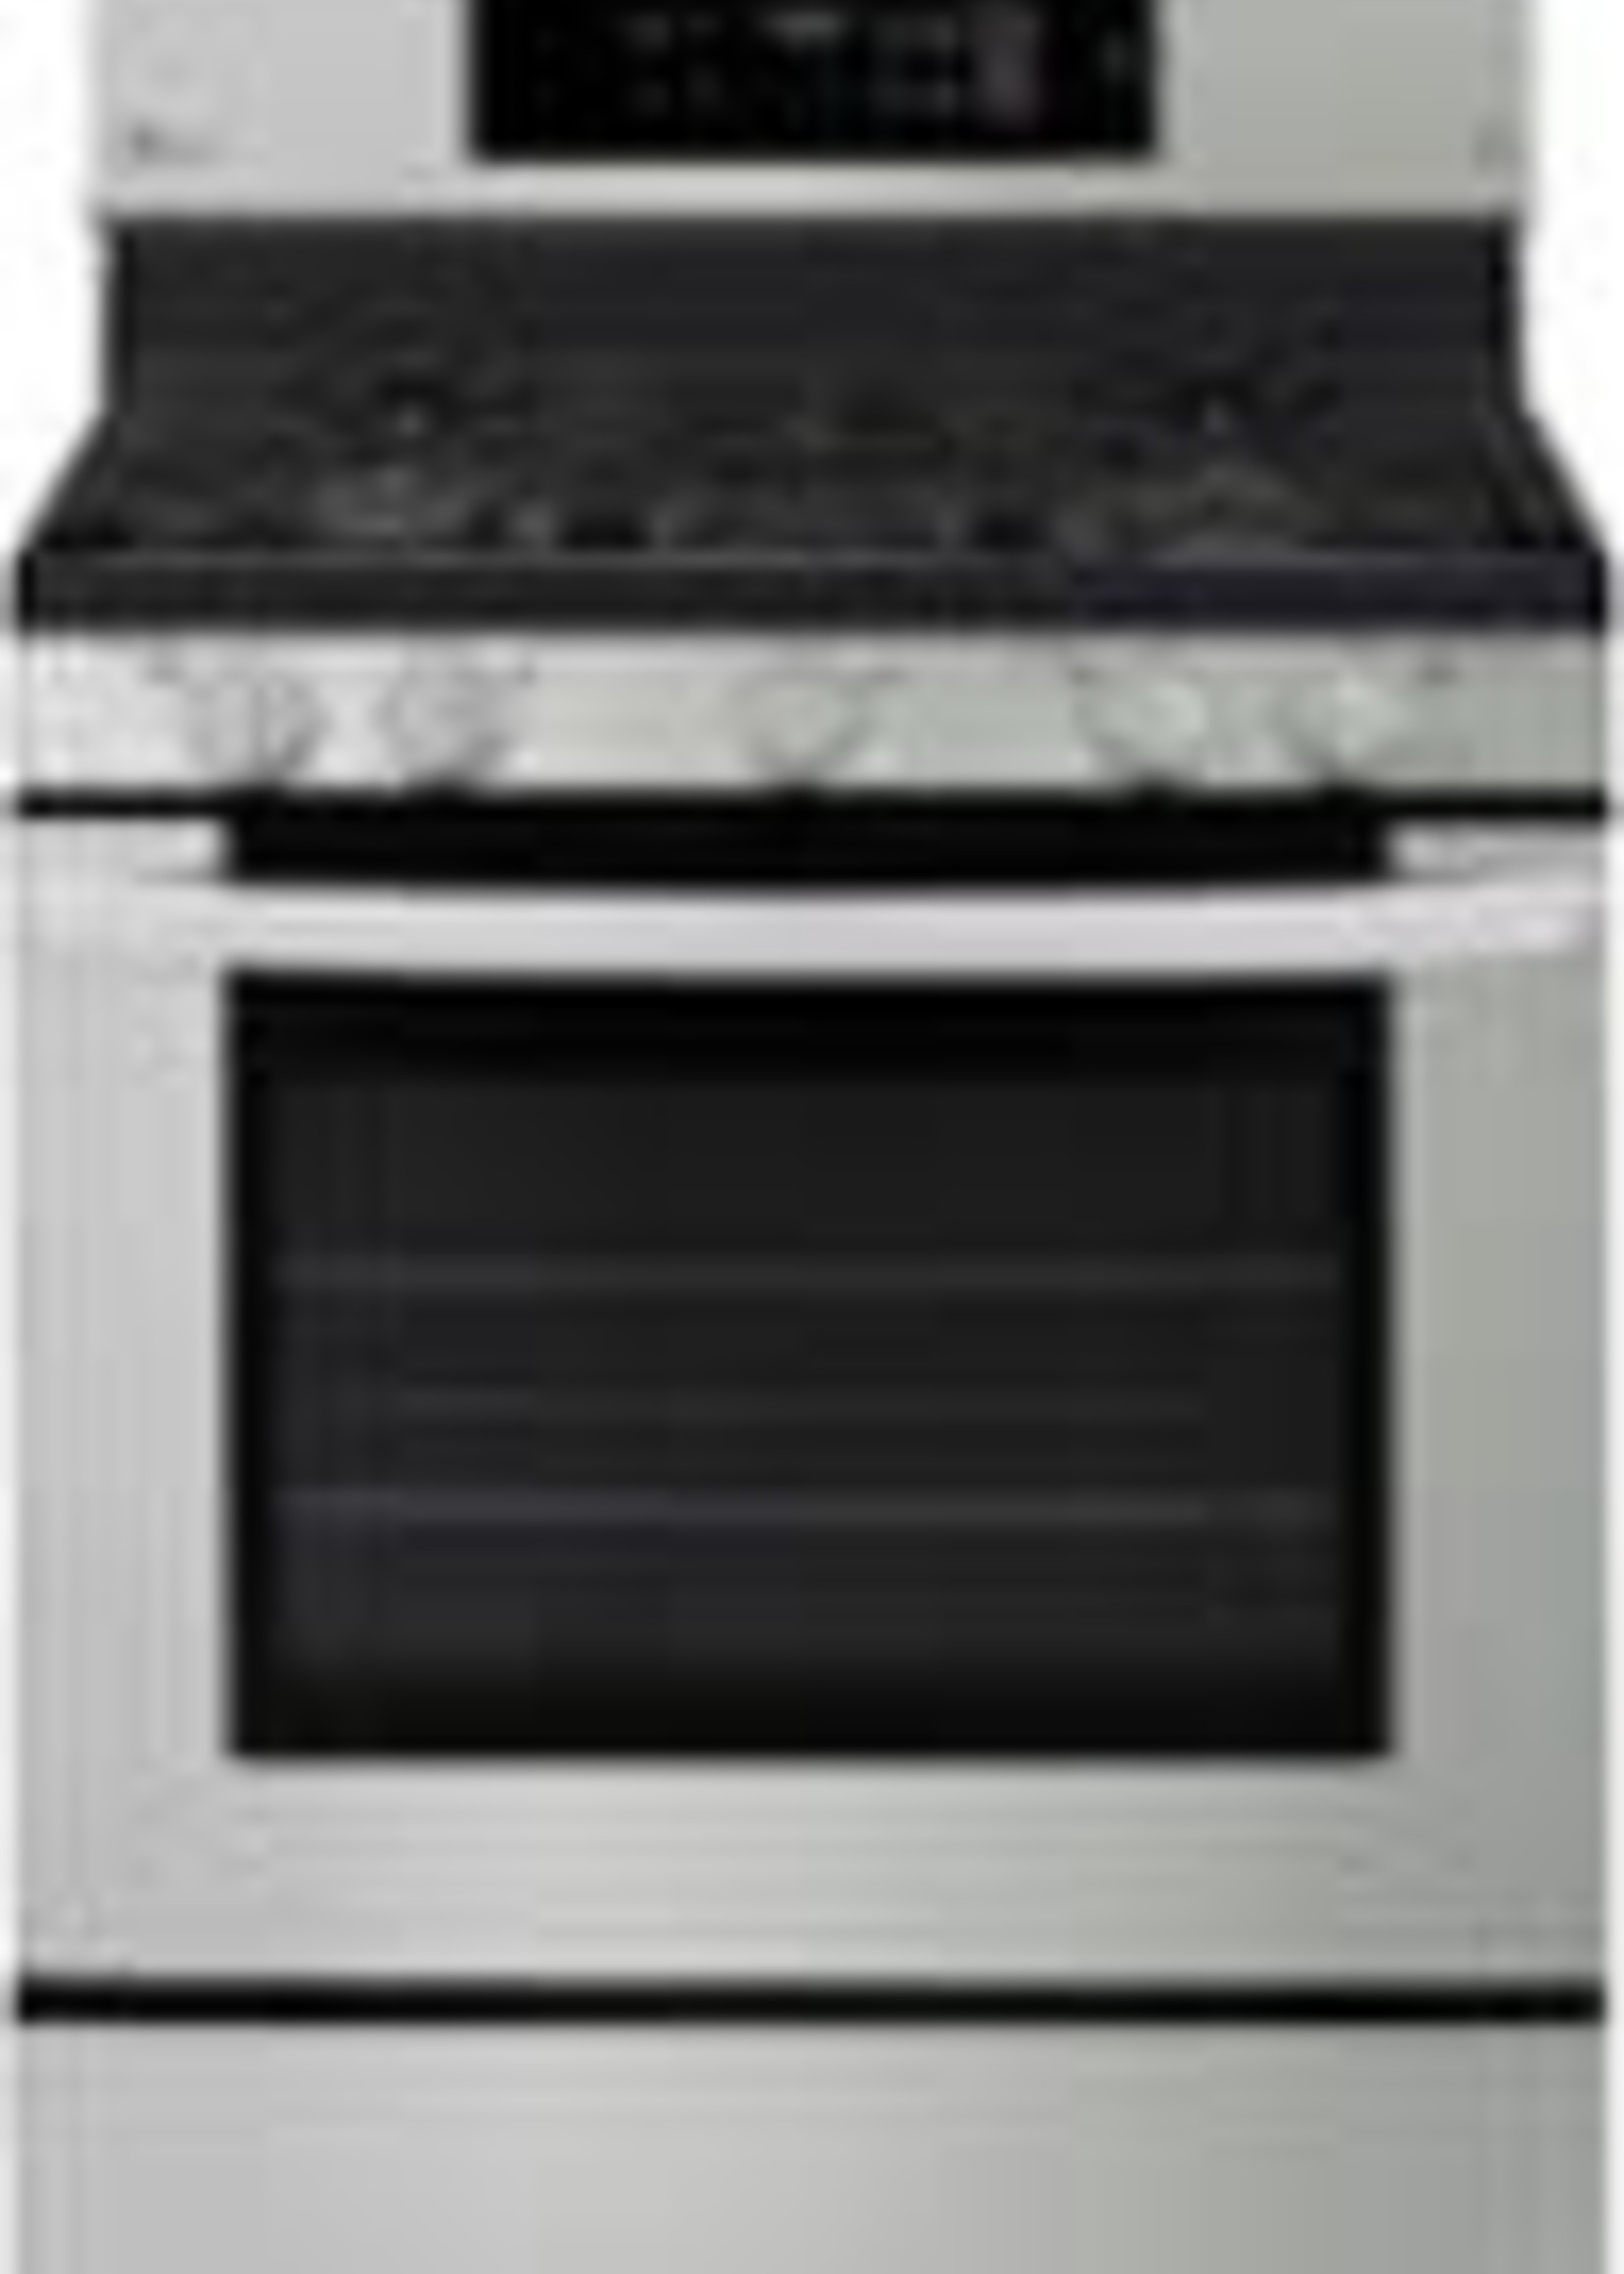 LG *LG  LRG3194ST 5.4 Cu. Ft. Self-Cleaning Freestanding Gas Convection Range with EasyClean - Stainless Steel